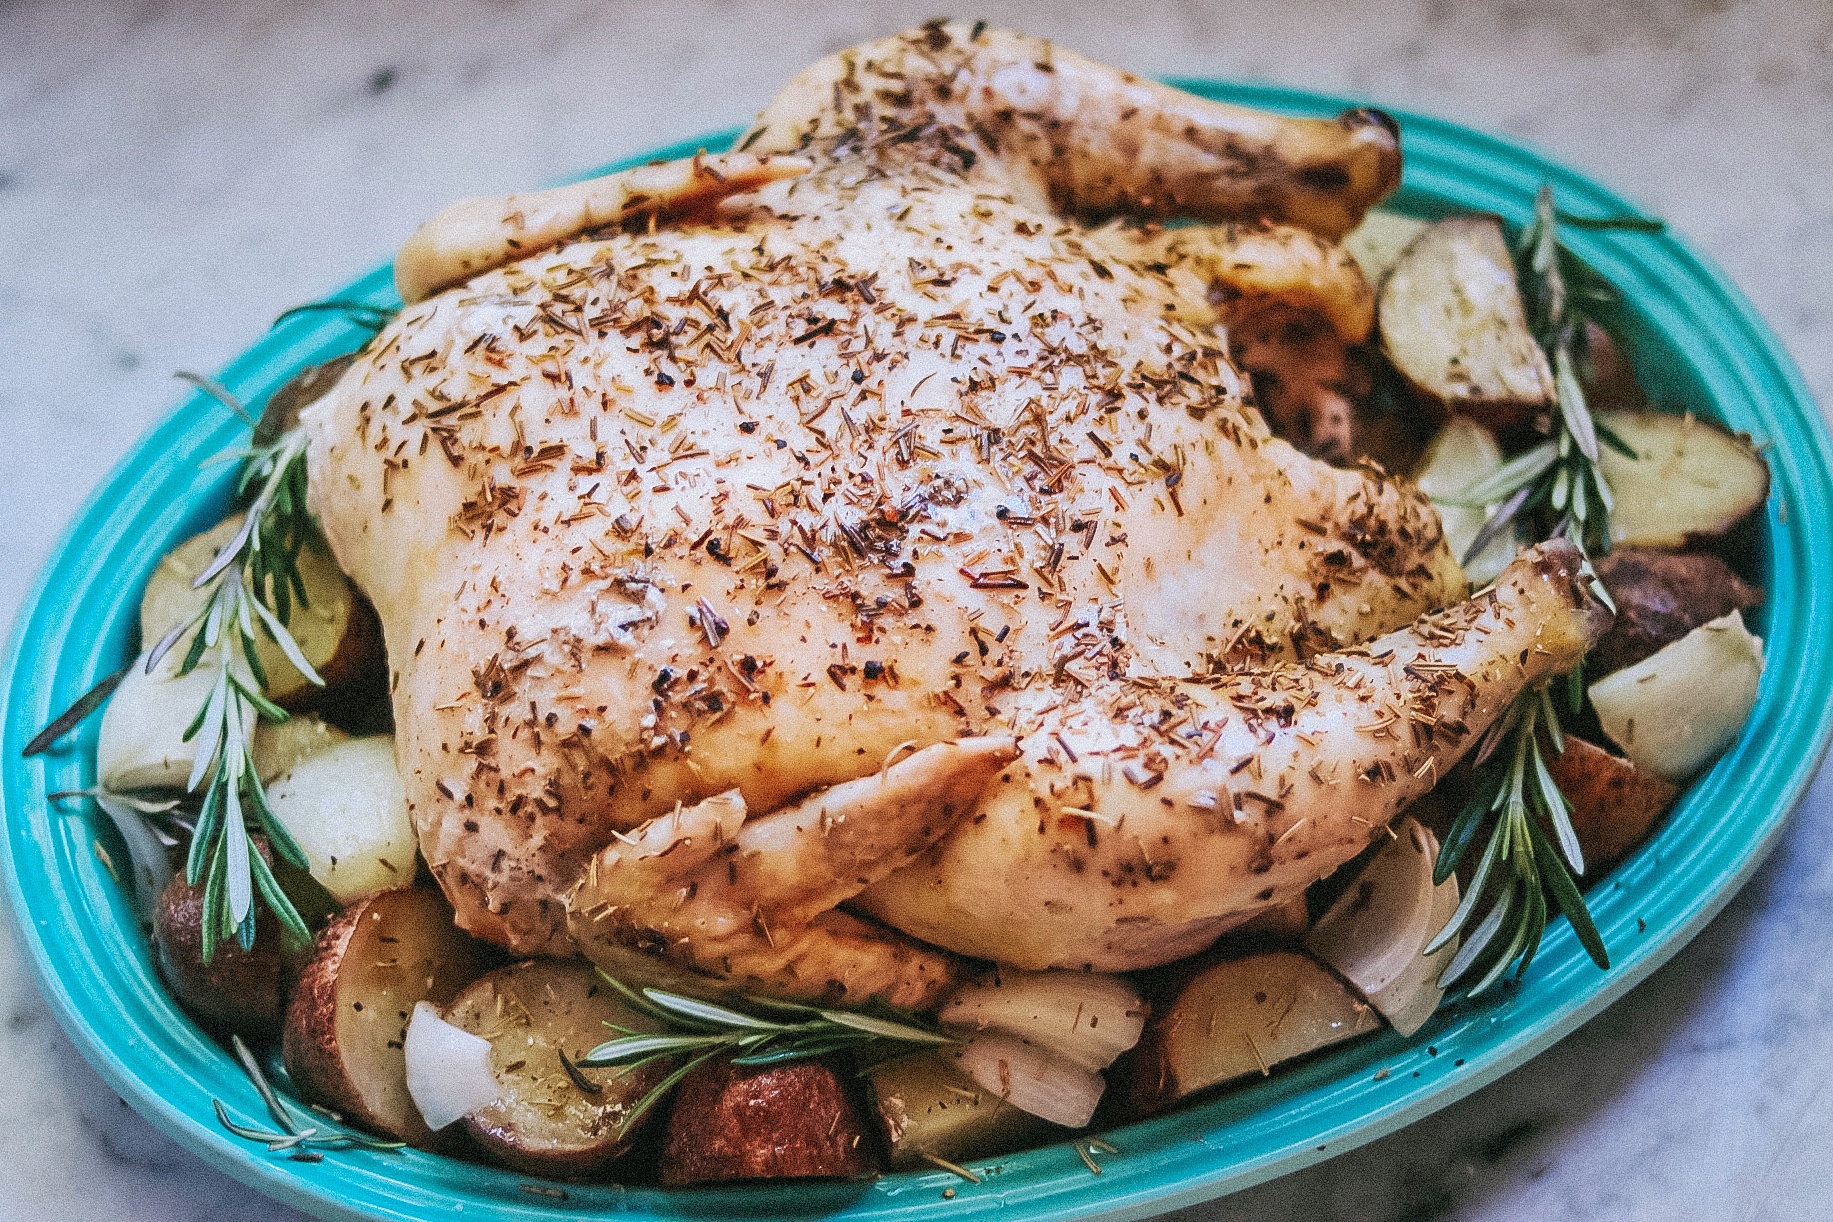 Garlic Rosemary Slow Cooker Whole Chicken Allrecipes,Substitute For Cornstarch In Pie Filling